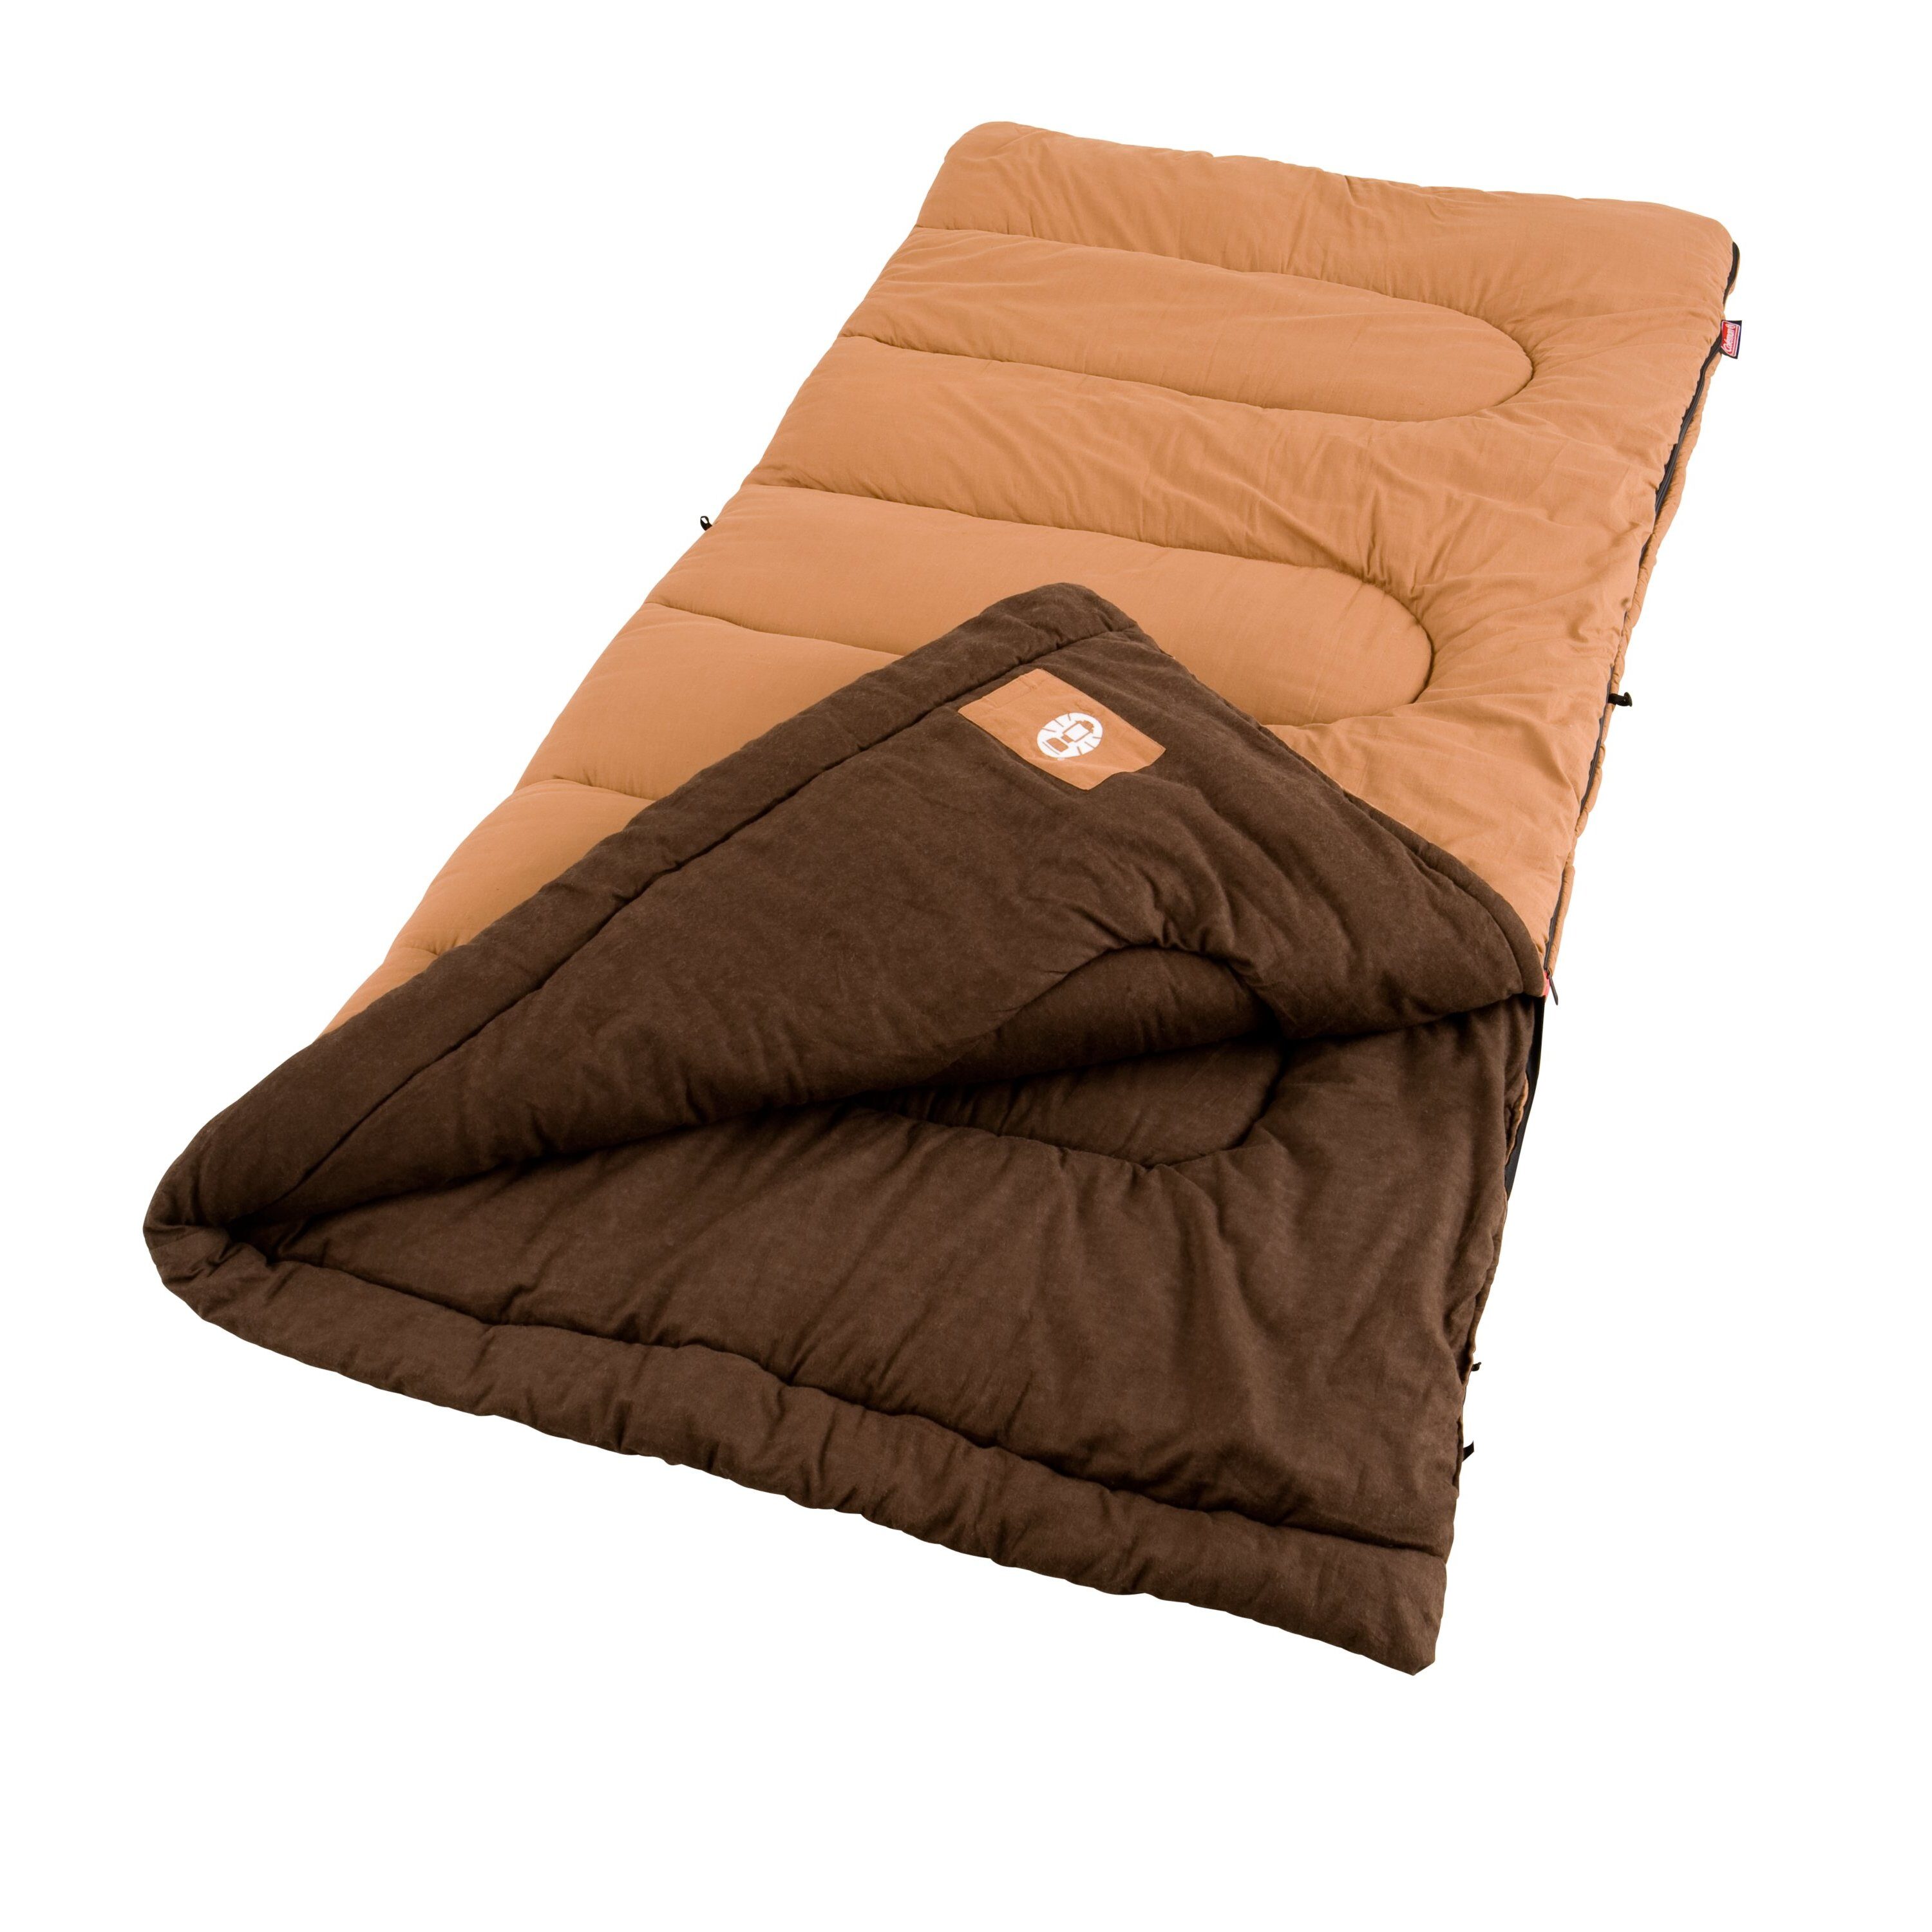 Leisure Sports 387097PEW Foam Sleep Pad, 1.25 Extra Thick Camping Mat